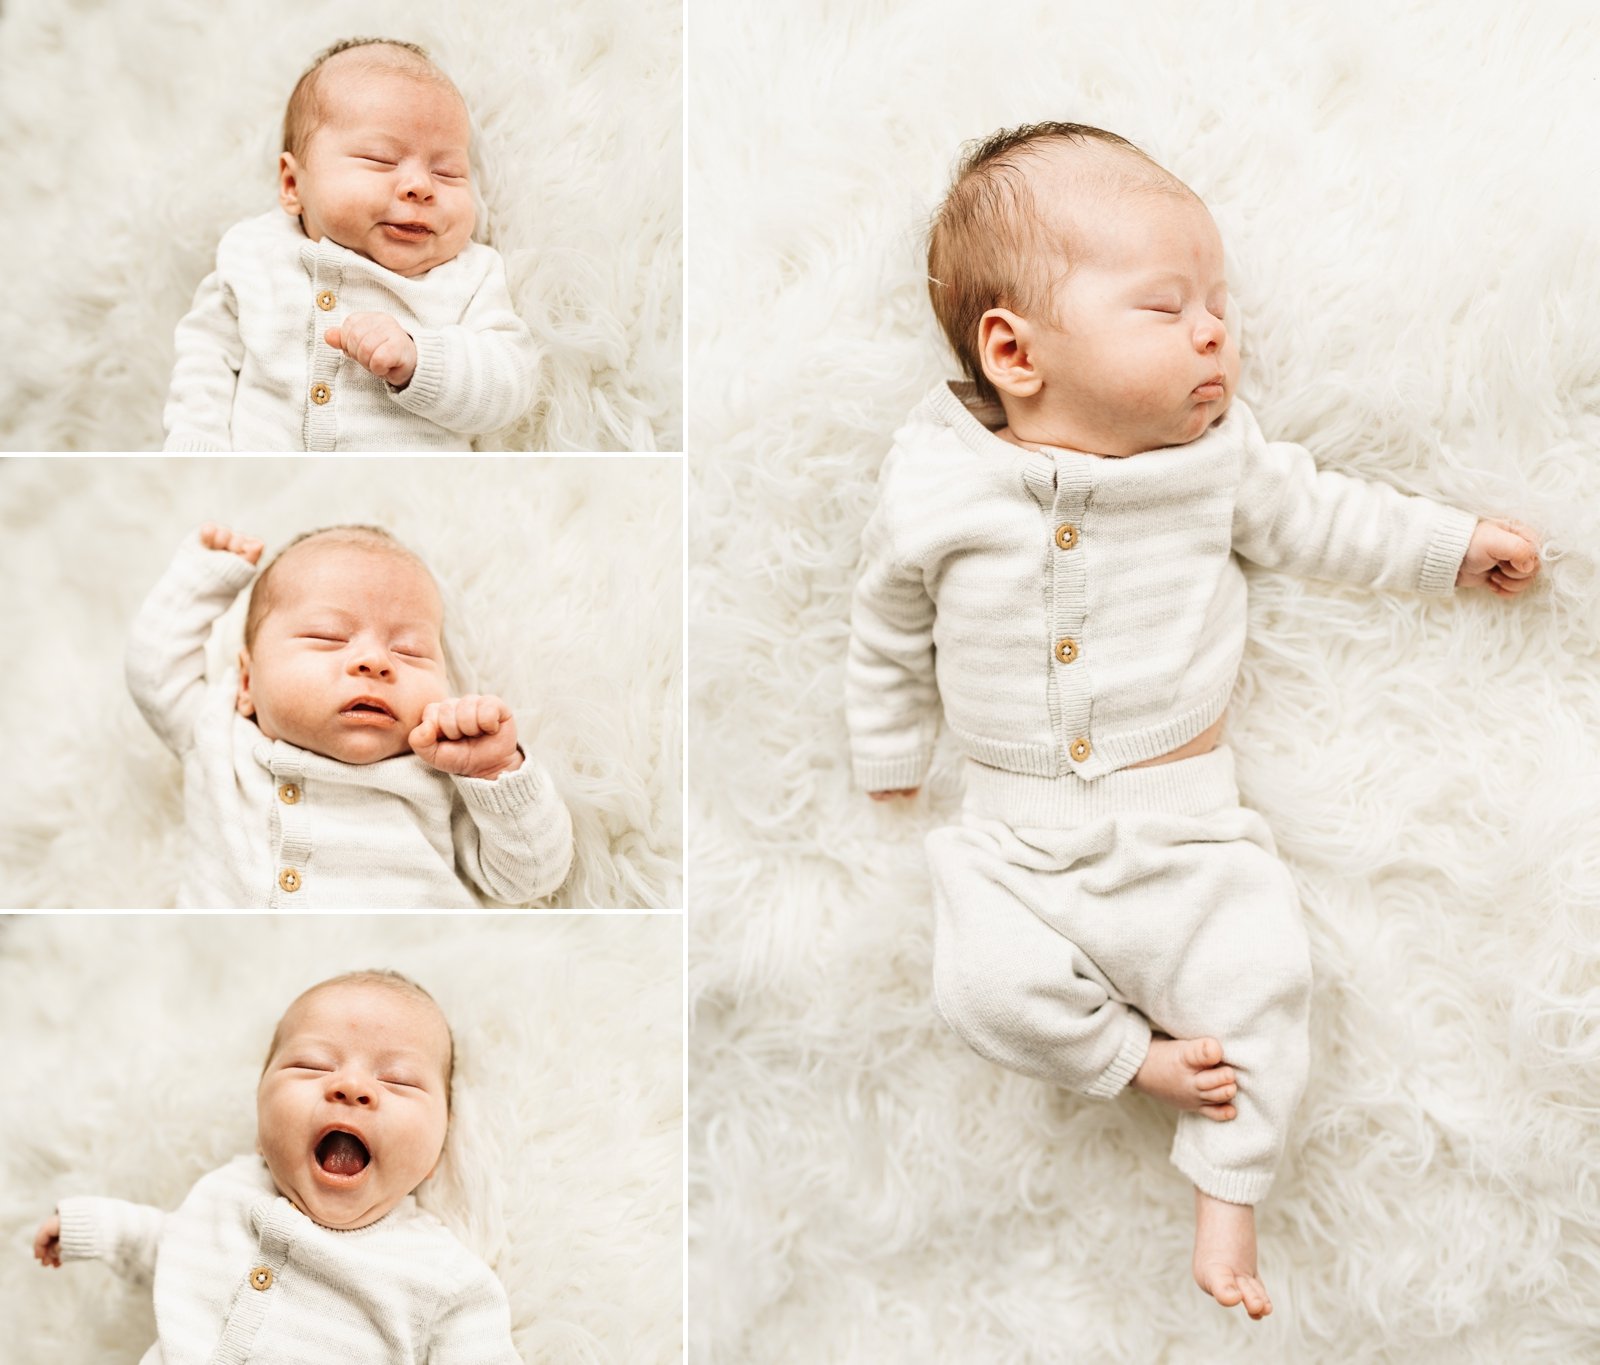 daly city at home newborn lifestyle photoshoot with sibling  3.jpg